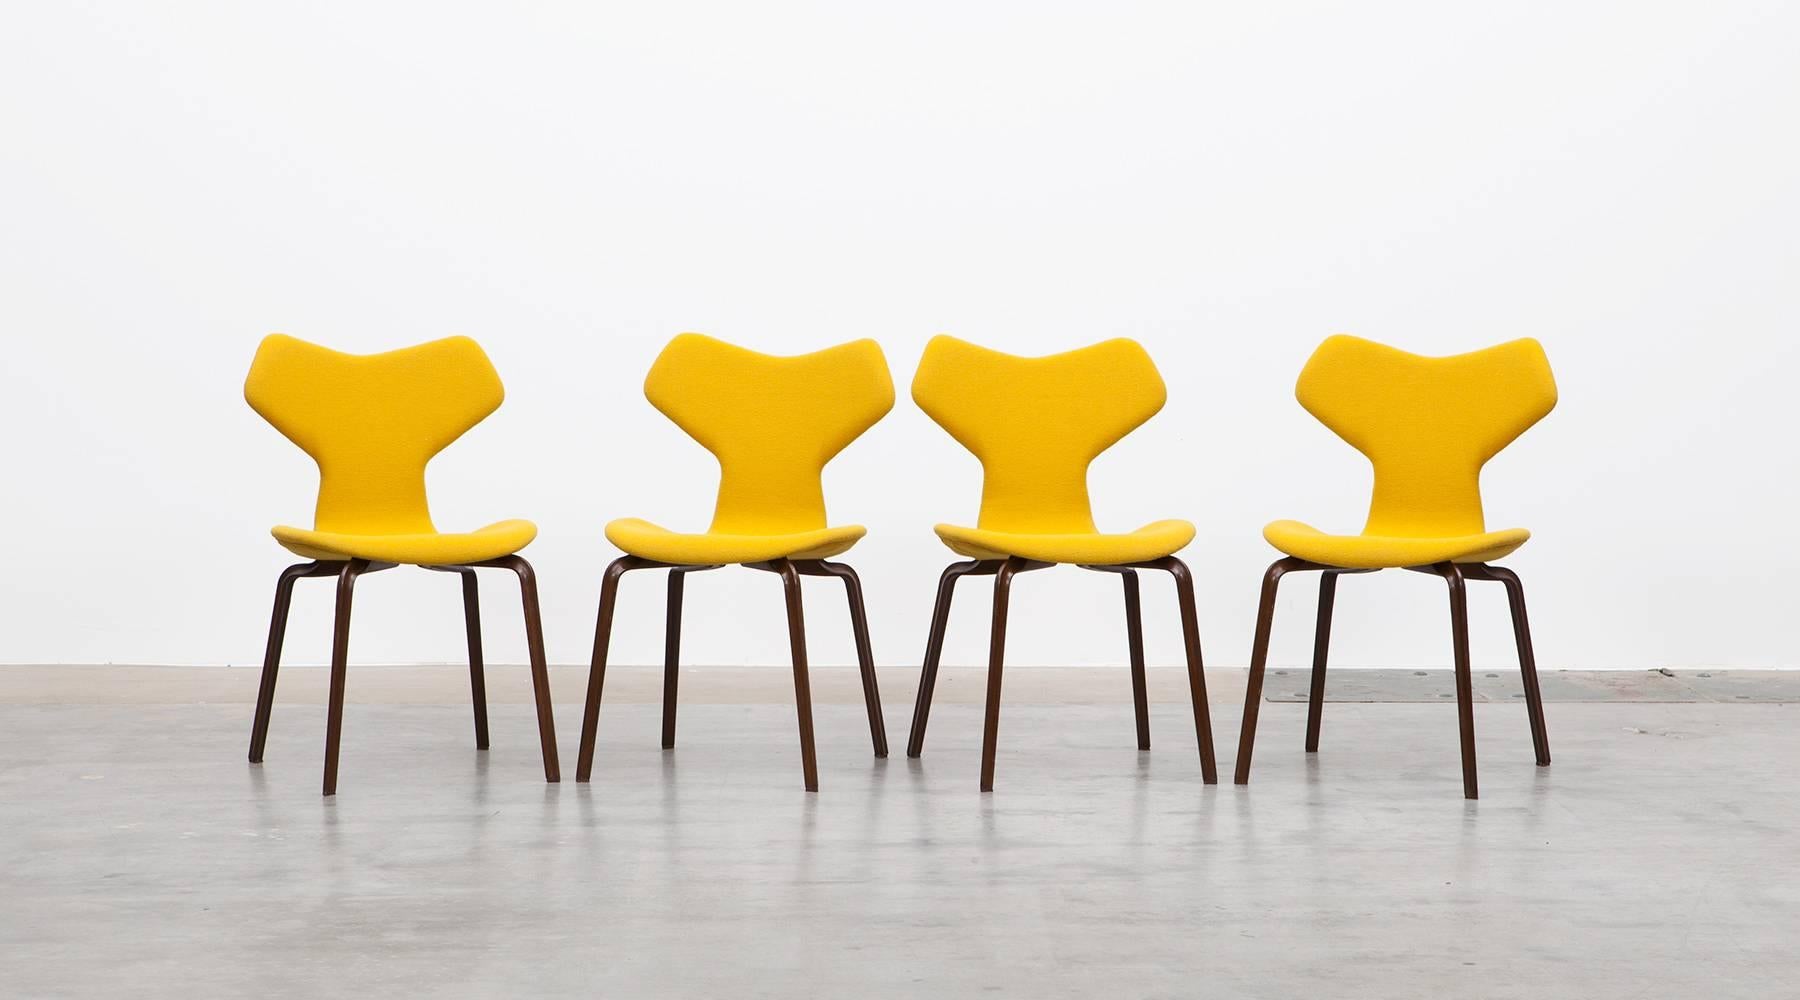 Grand Prix Chairs, new upholstery by Arne Jacobsen, Denmark, 1955.

These Grand Prix chairs are a stackable Set and designed by the Danish architect and designer Arne Jacobsen in 1955. Firstly presented at the spring exhibition of the Danish arts